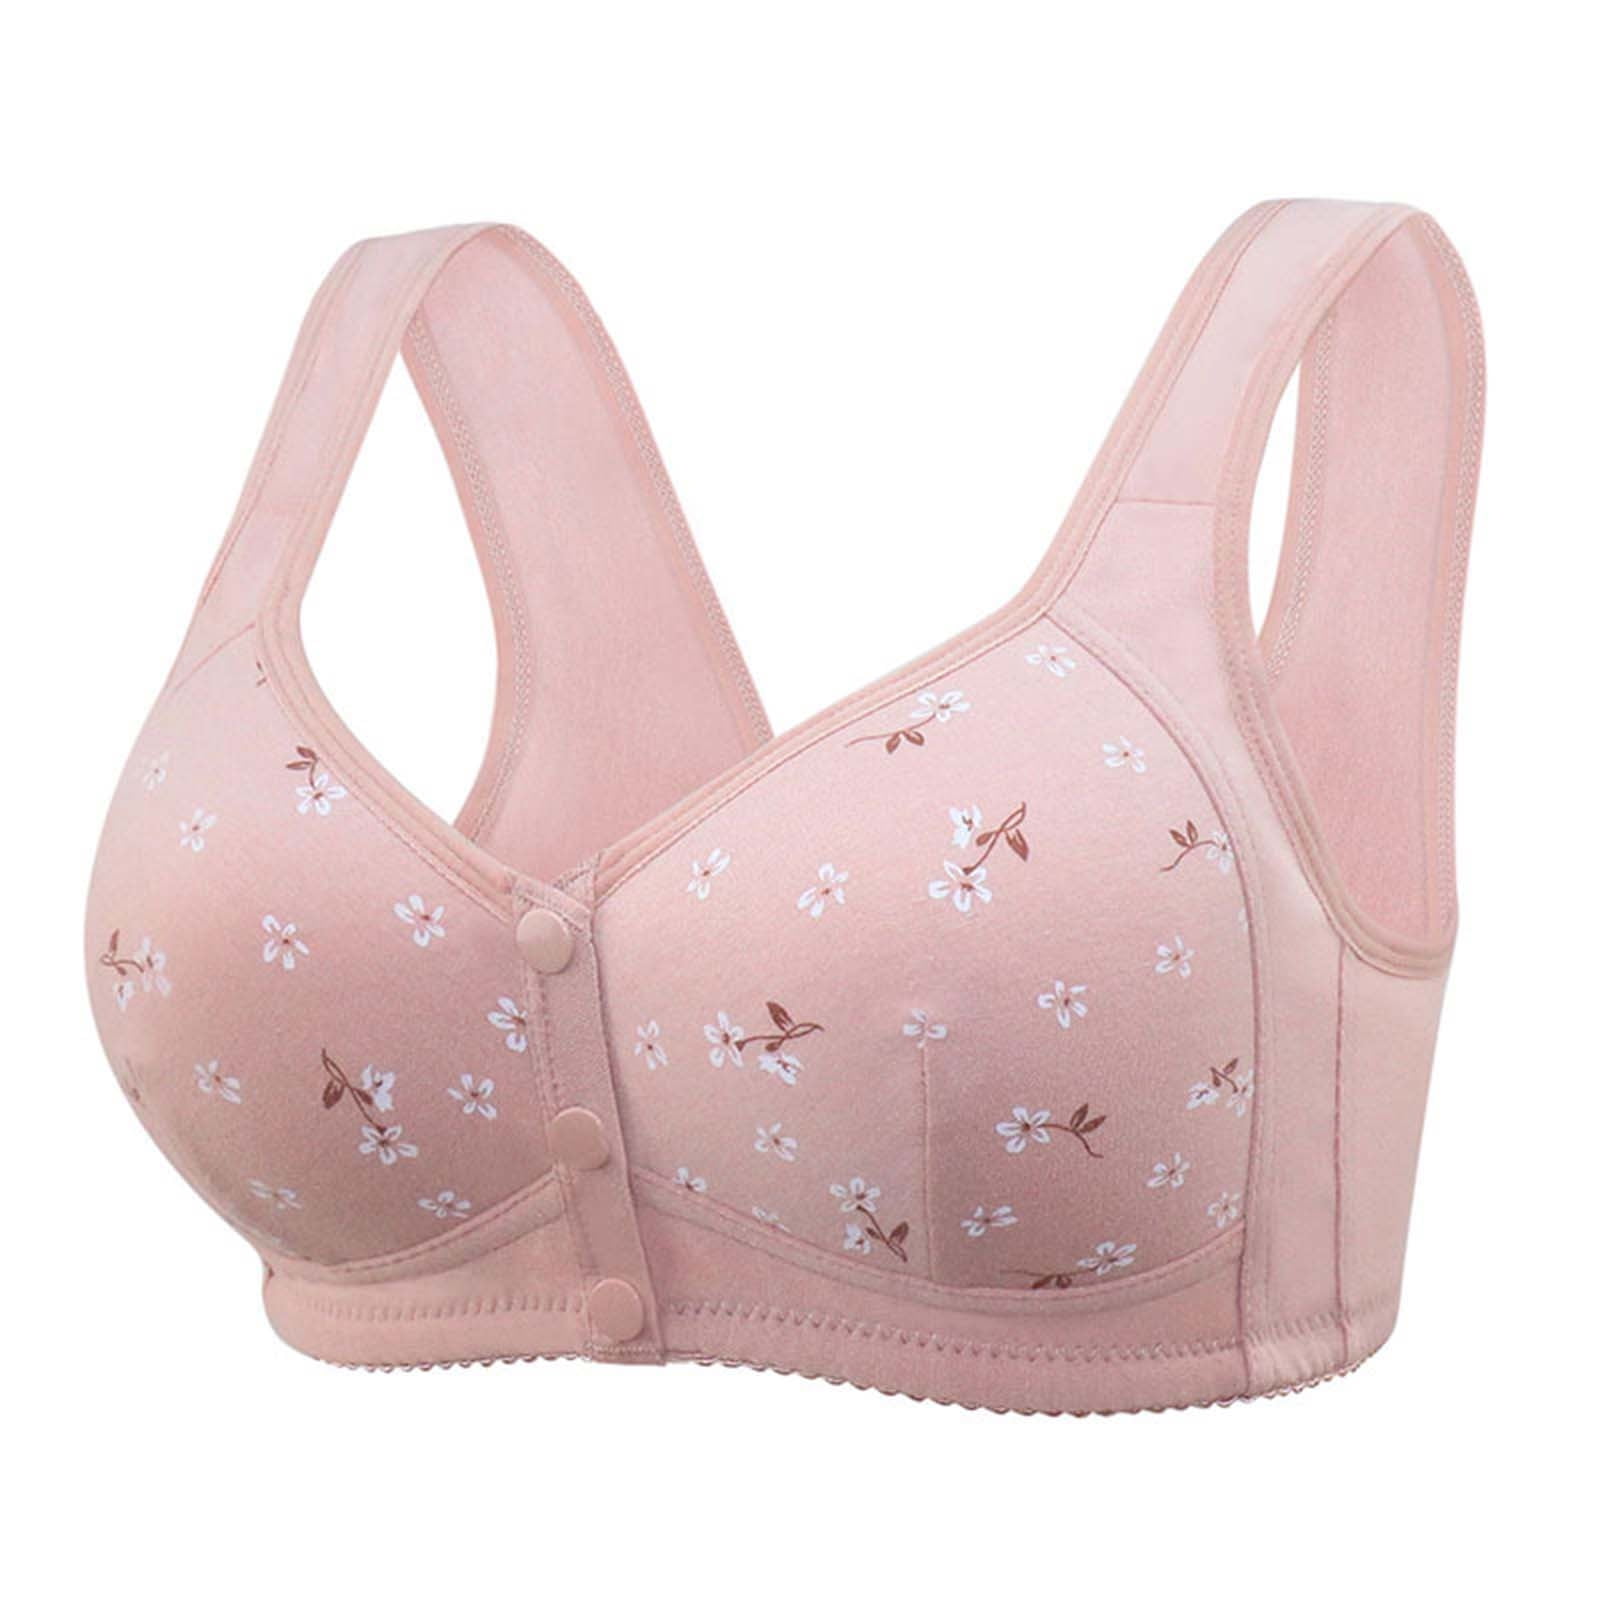 RYRJJ Clearance Daisy Bra Front Snaps Seniors Bra for Women Plus Size  Full-Coverage Wirefree Bralettes Comfortable Easy Close Sports Bras(Pink,46)  